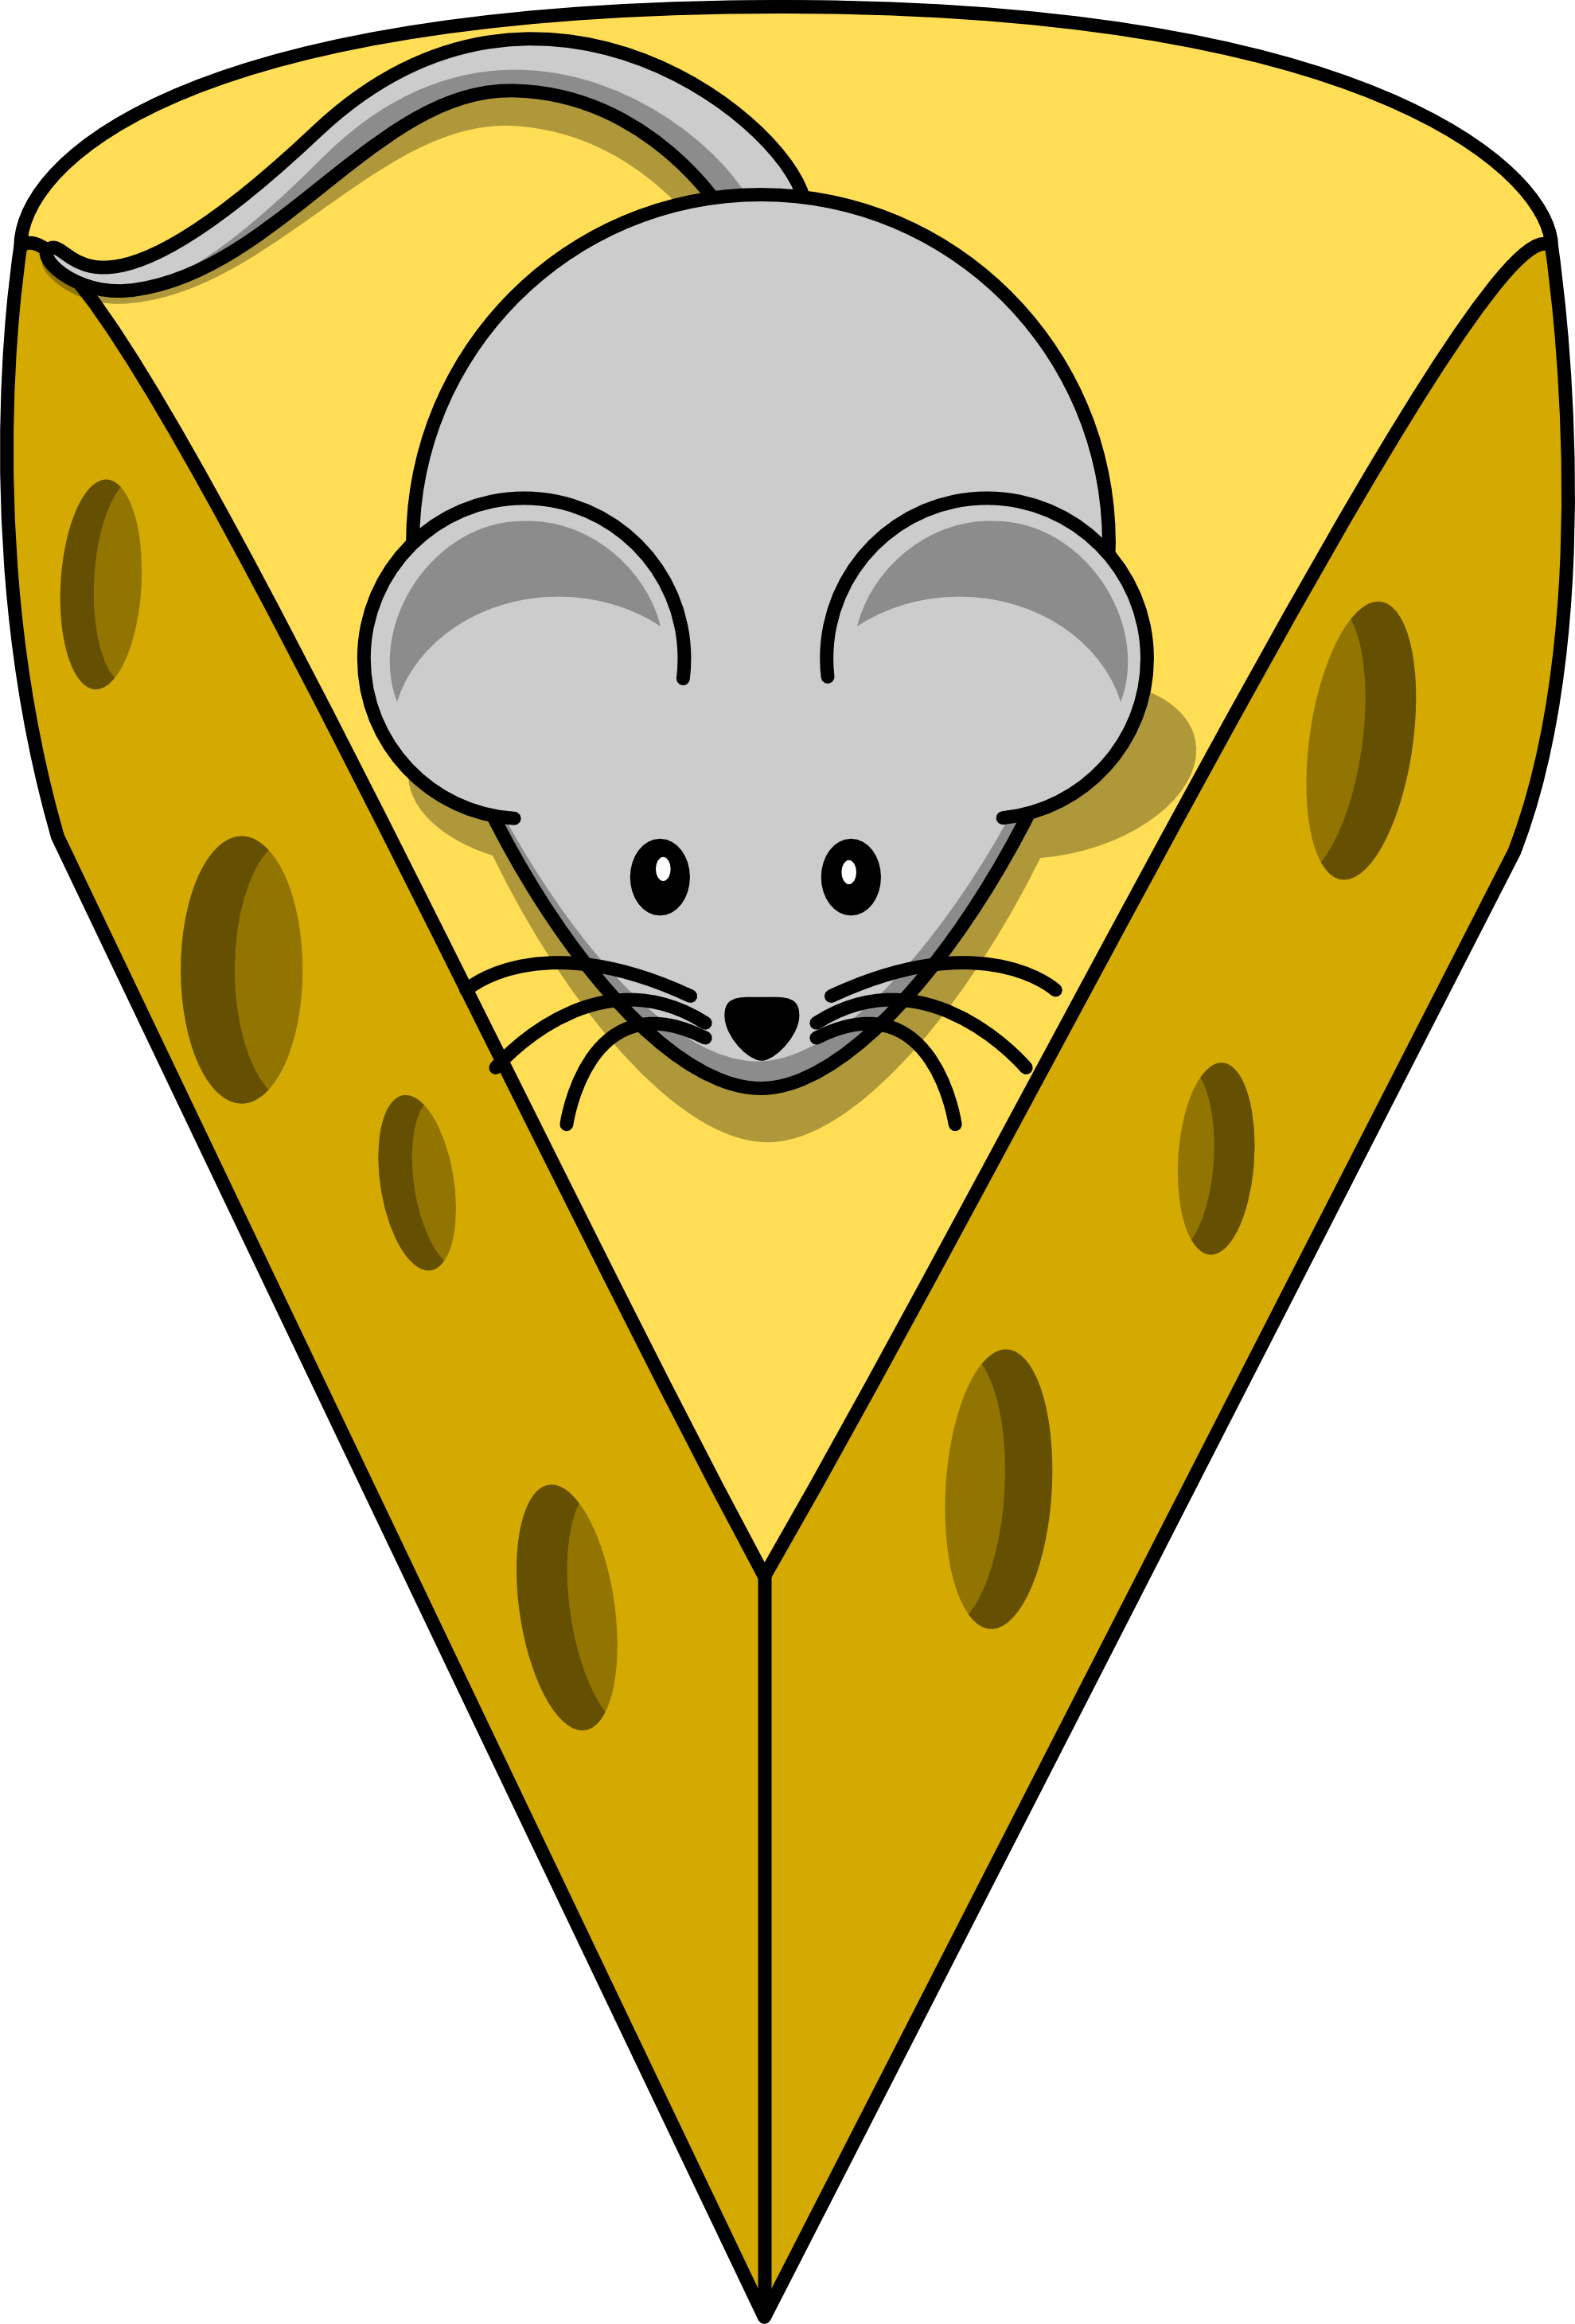 Panda free images mousecheeseclipart. Cheese clipart mouse